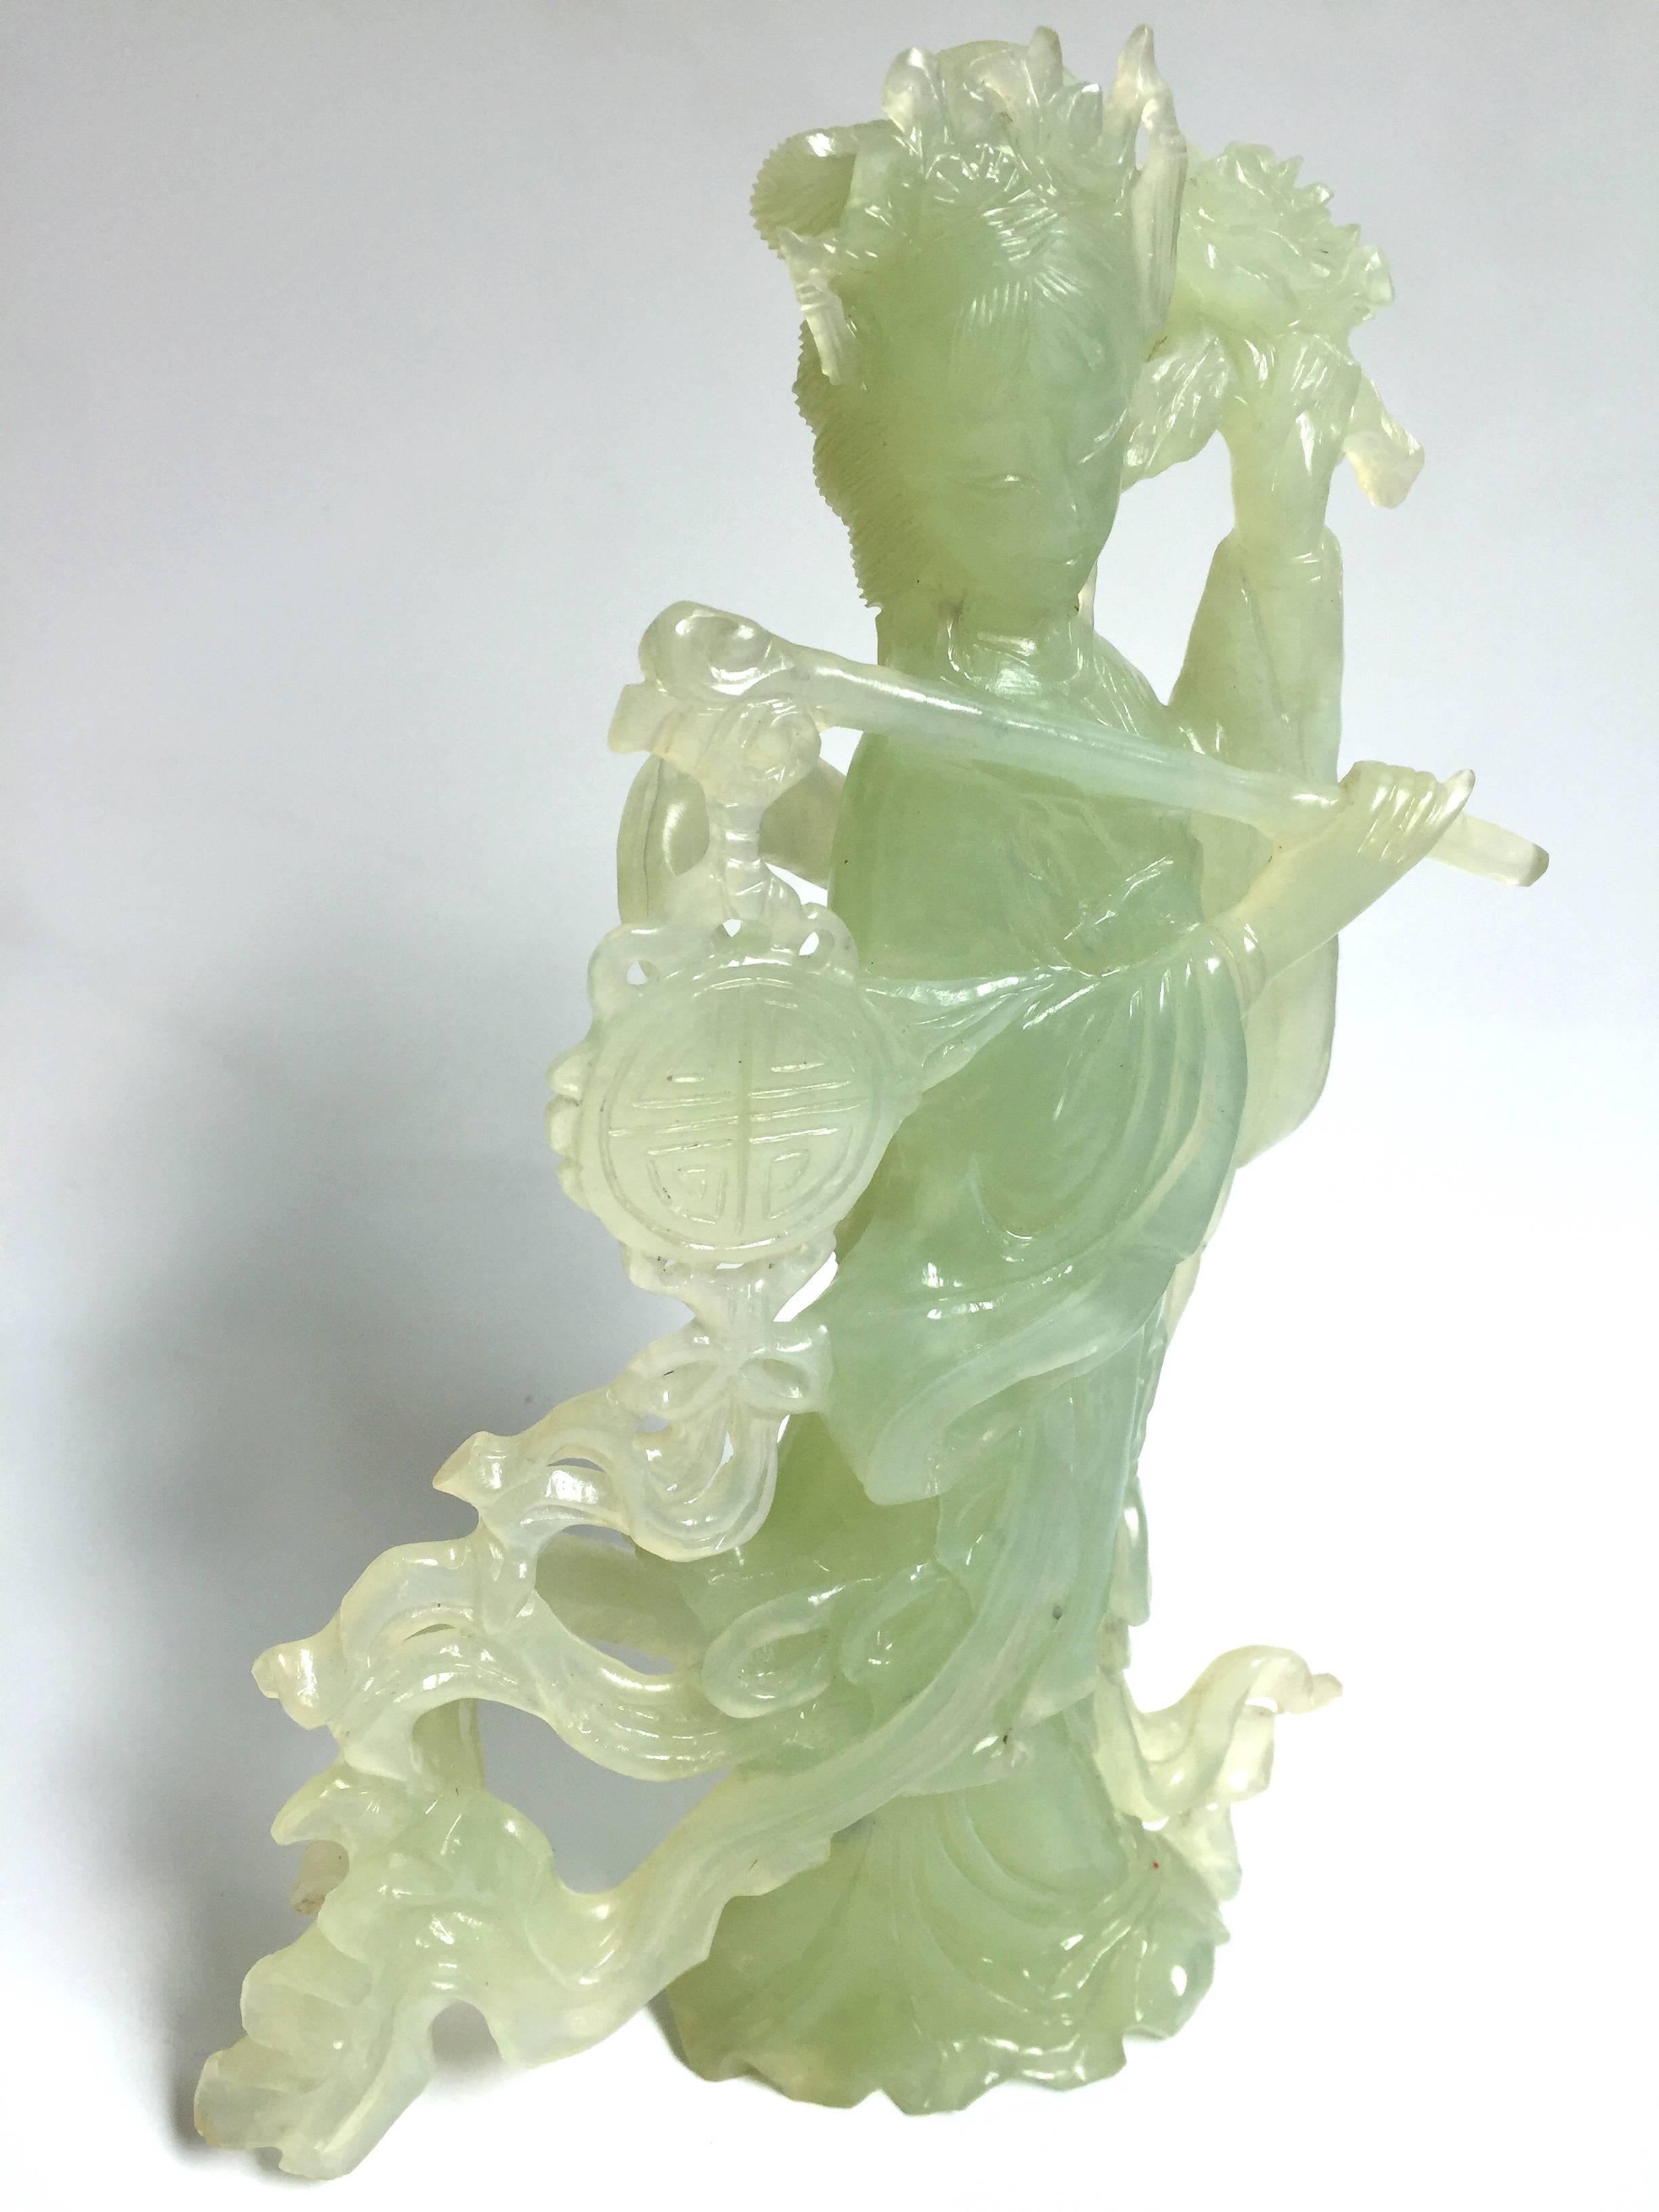 Absolutely beautiful statue of the Chinese Moon Fairy.

The statue is made of all natural green serpentine. It is hand-carved by a master. Her facial features and fingers are finely done. Her robe and ribbons flying in the wind adds movement to